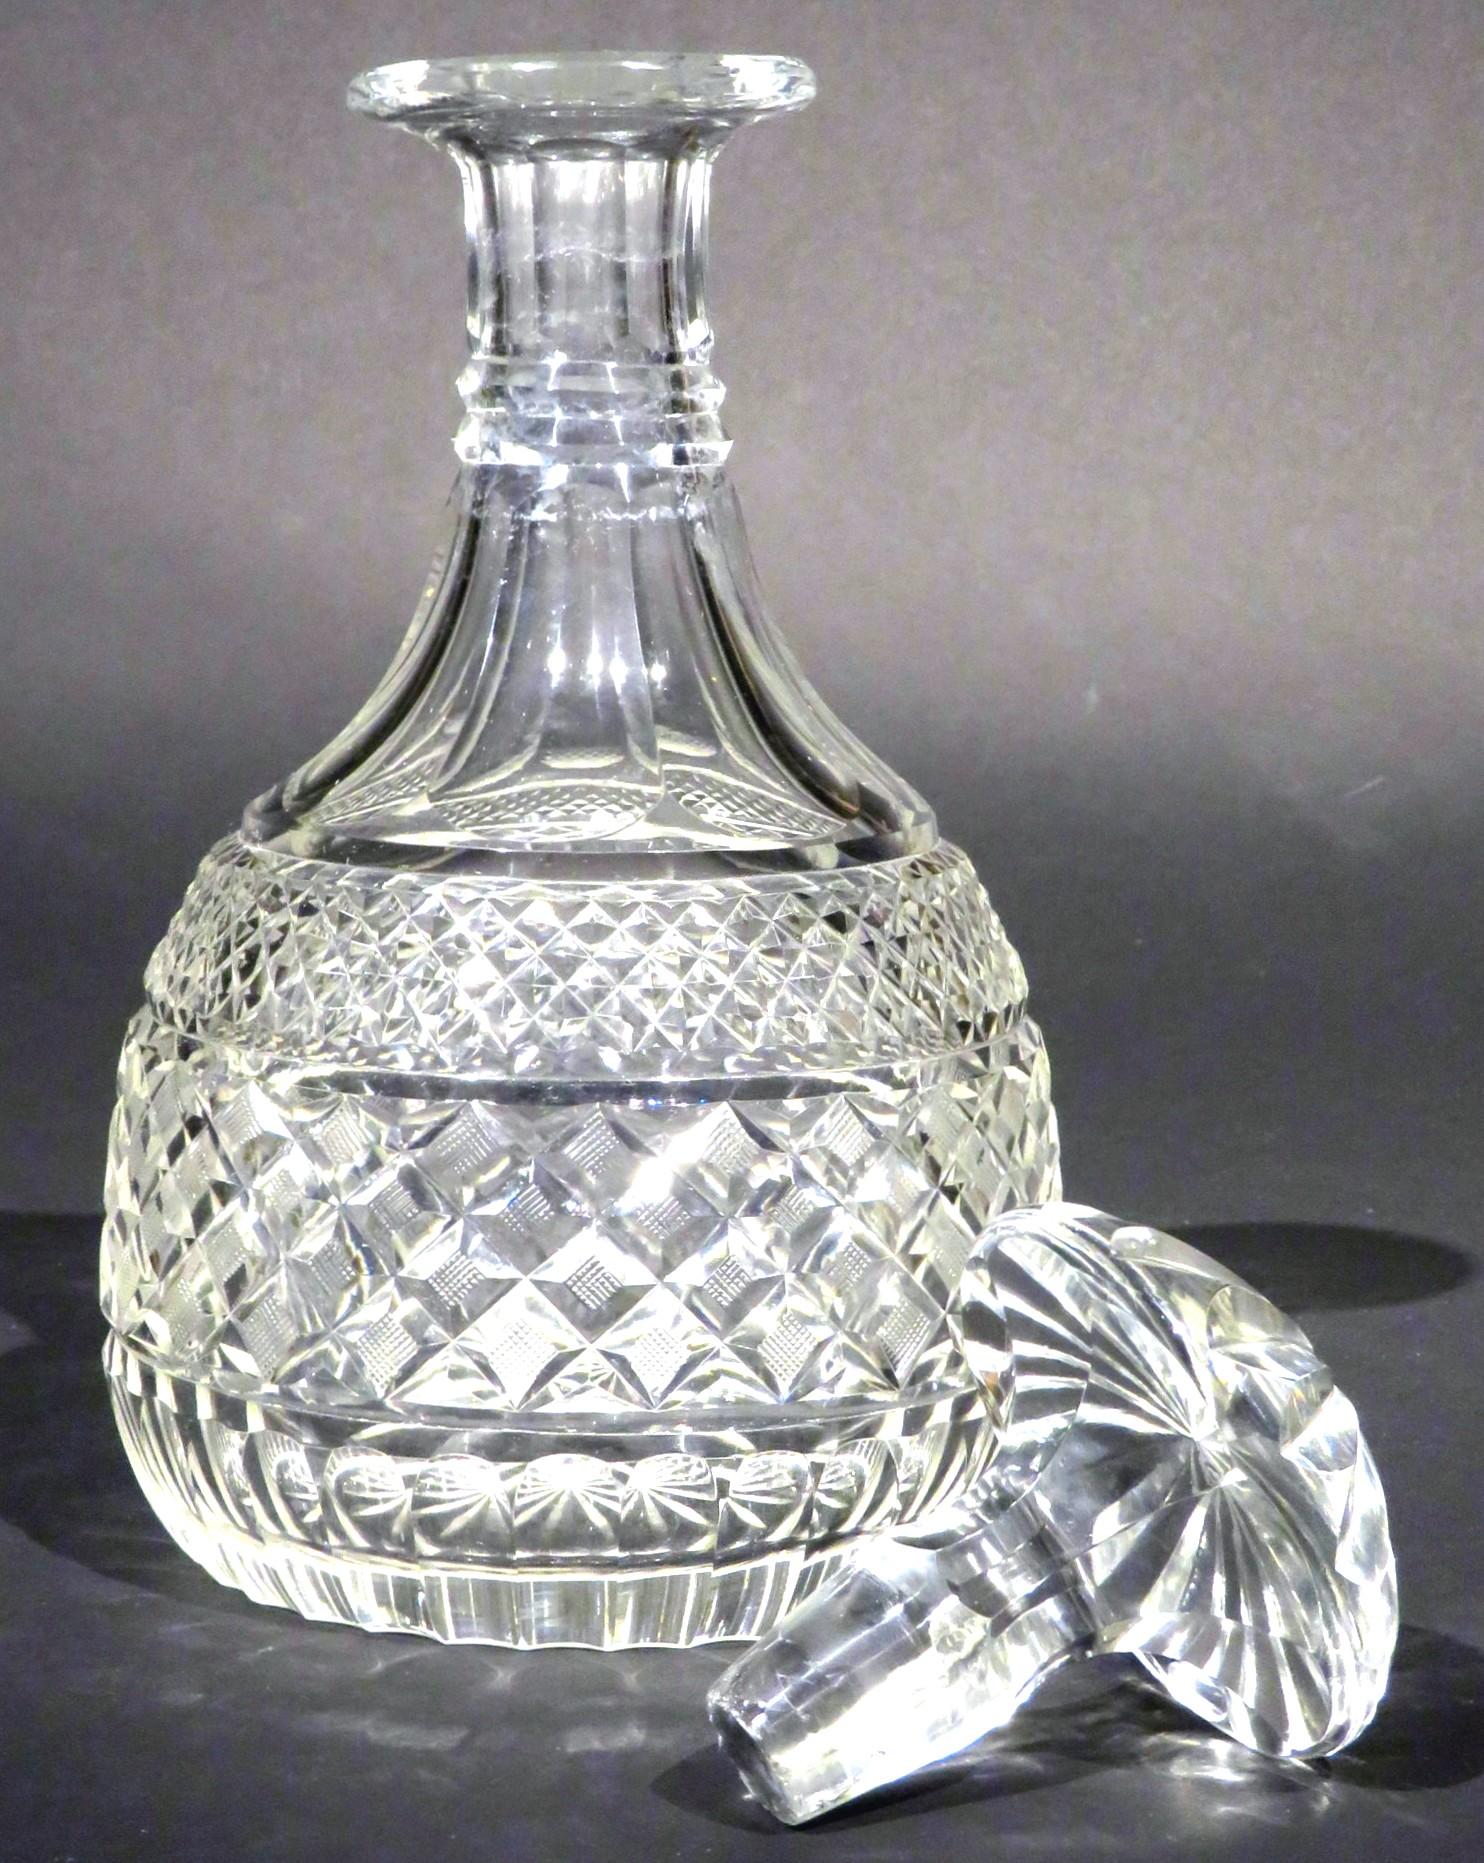 The greyish glass body showing a mitre-cut double ringed neck over broad flutes rising to its original mushroom stopper, the shoulders banded with diamond cut motifs & mitre-cut rings over a band of cross-cut hobnail motifs, the base with a running